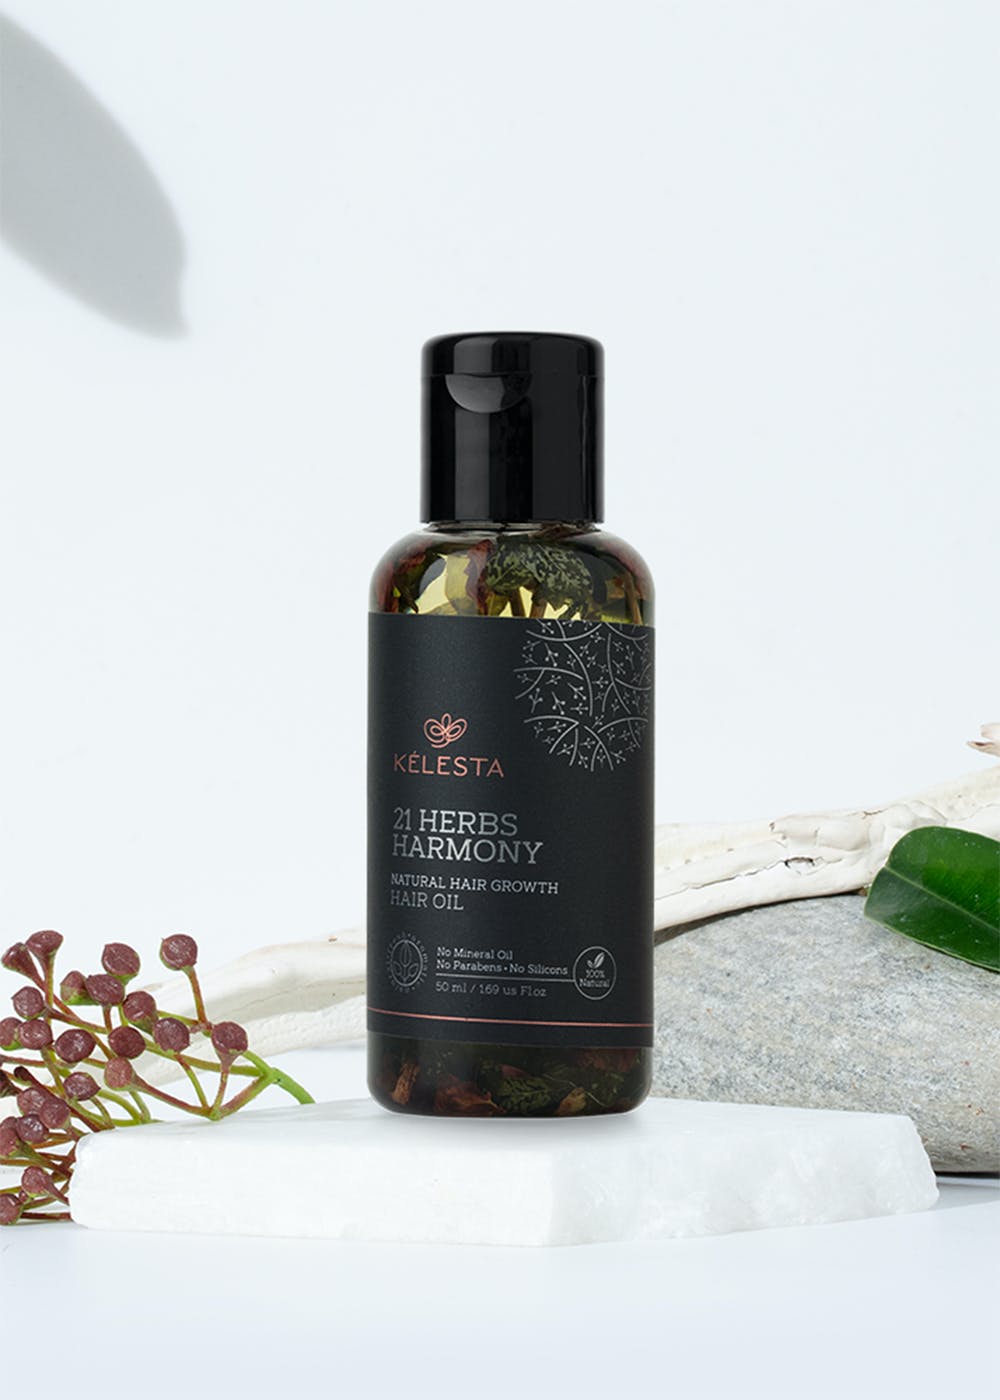 Get 21 Herbs Harmony Hair Oil With Natural Ingredients - 50 ml at ₹ 187 |  LBB Shop